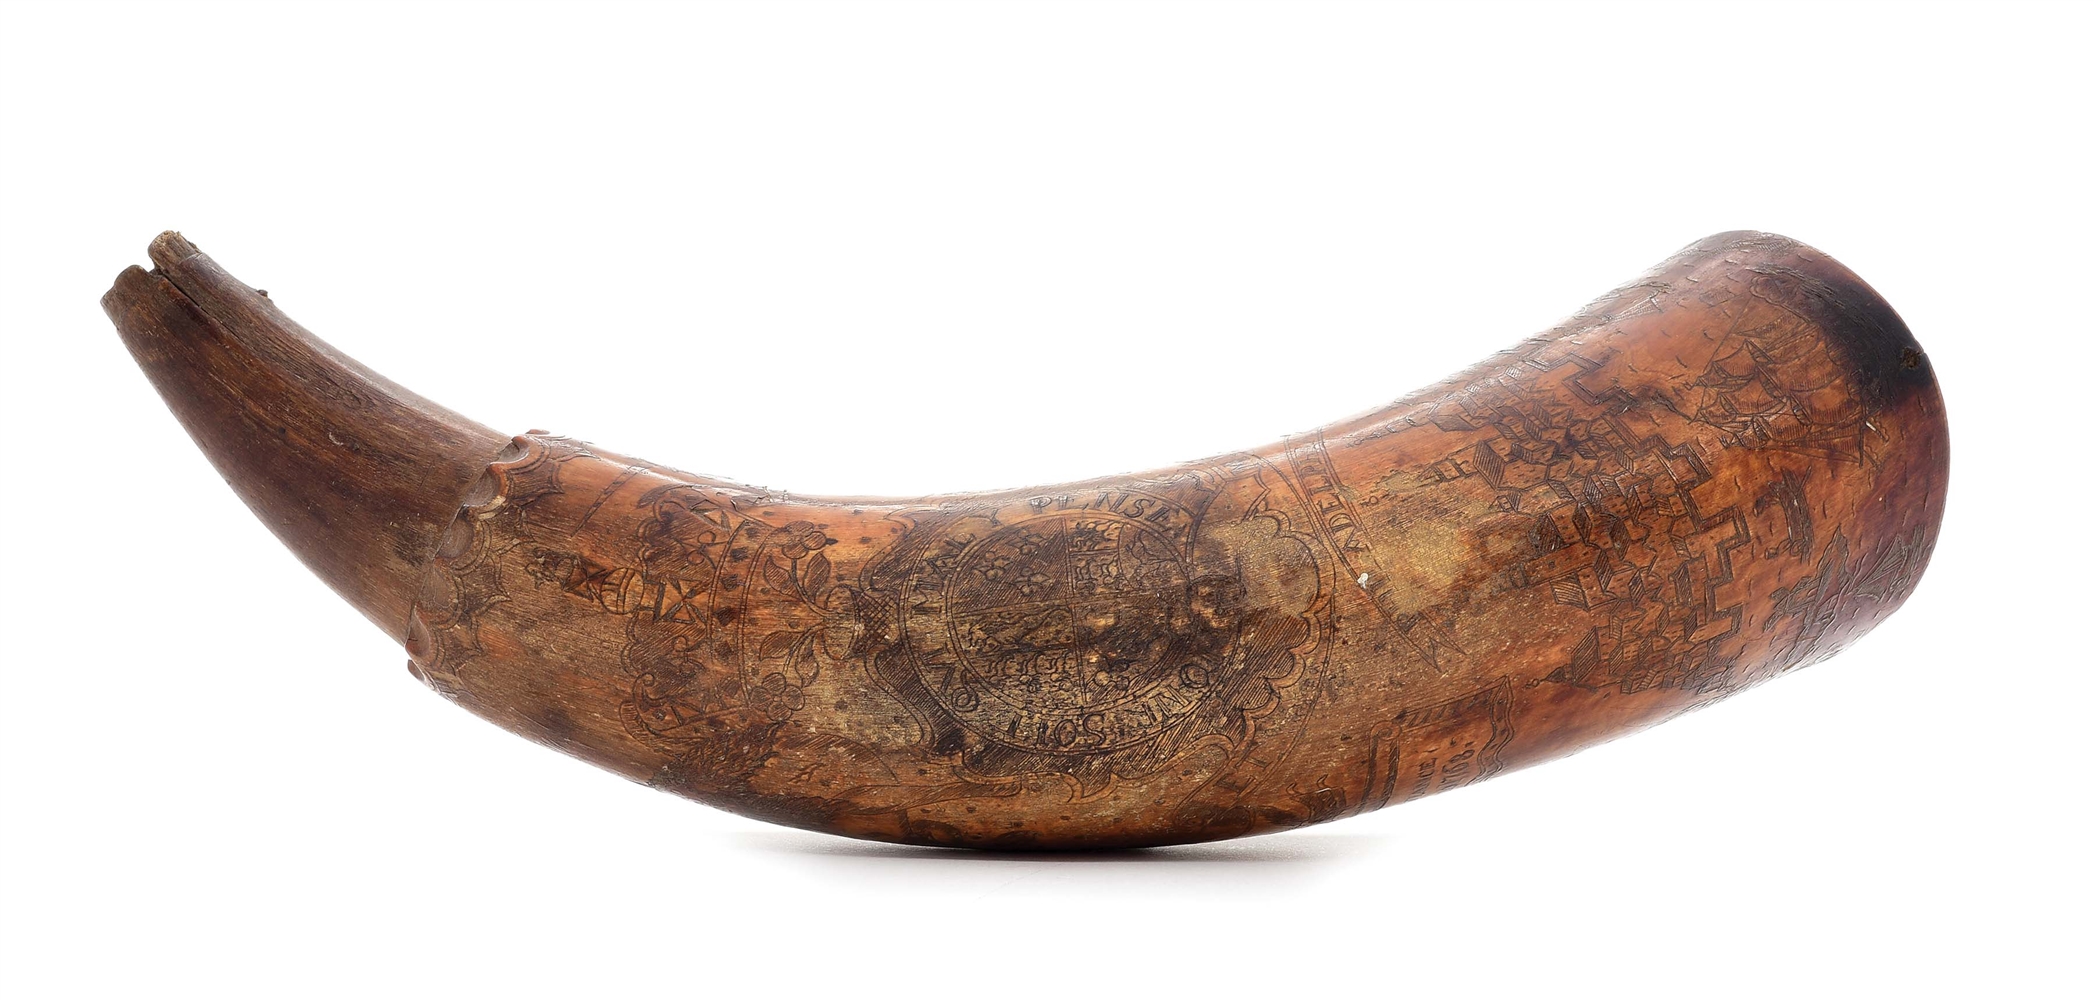 ENGRAVED PHILADELPHIA MAP POWDER HORN OF JOHN PURVIANCE, DATED 1768, ATTRIBUTED TO THE POINTED TREE CARVER.